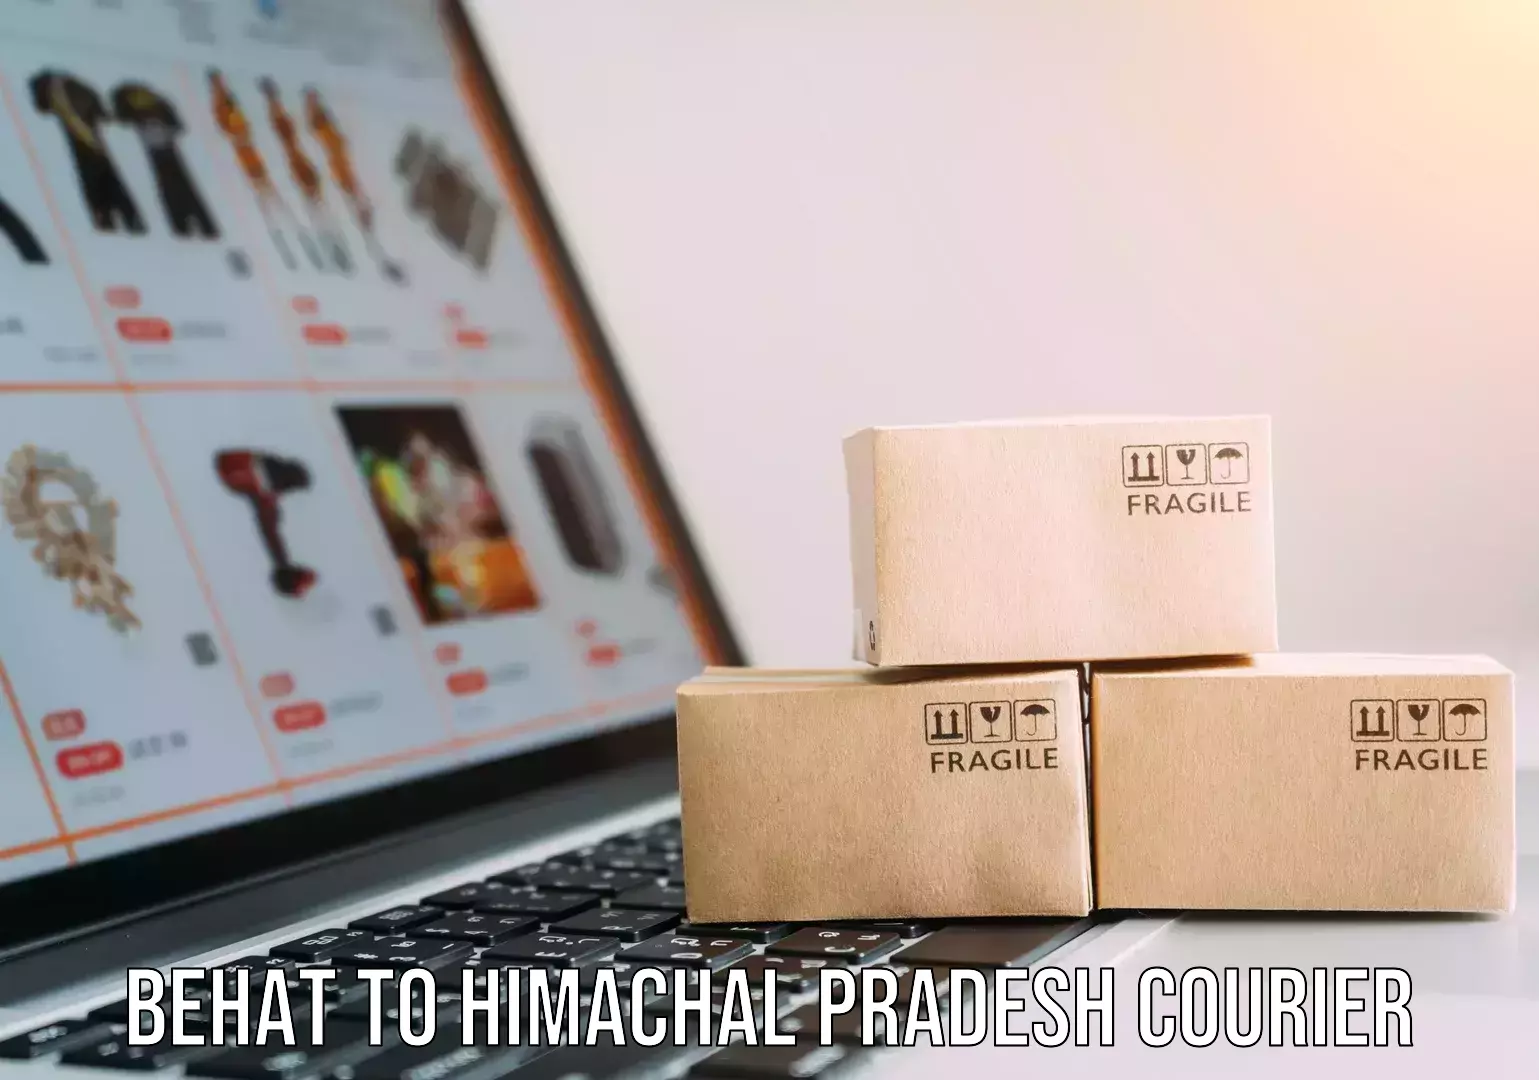 Overnight delivery services Behat to Himachal Pradesh